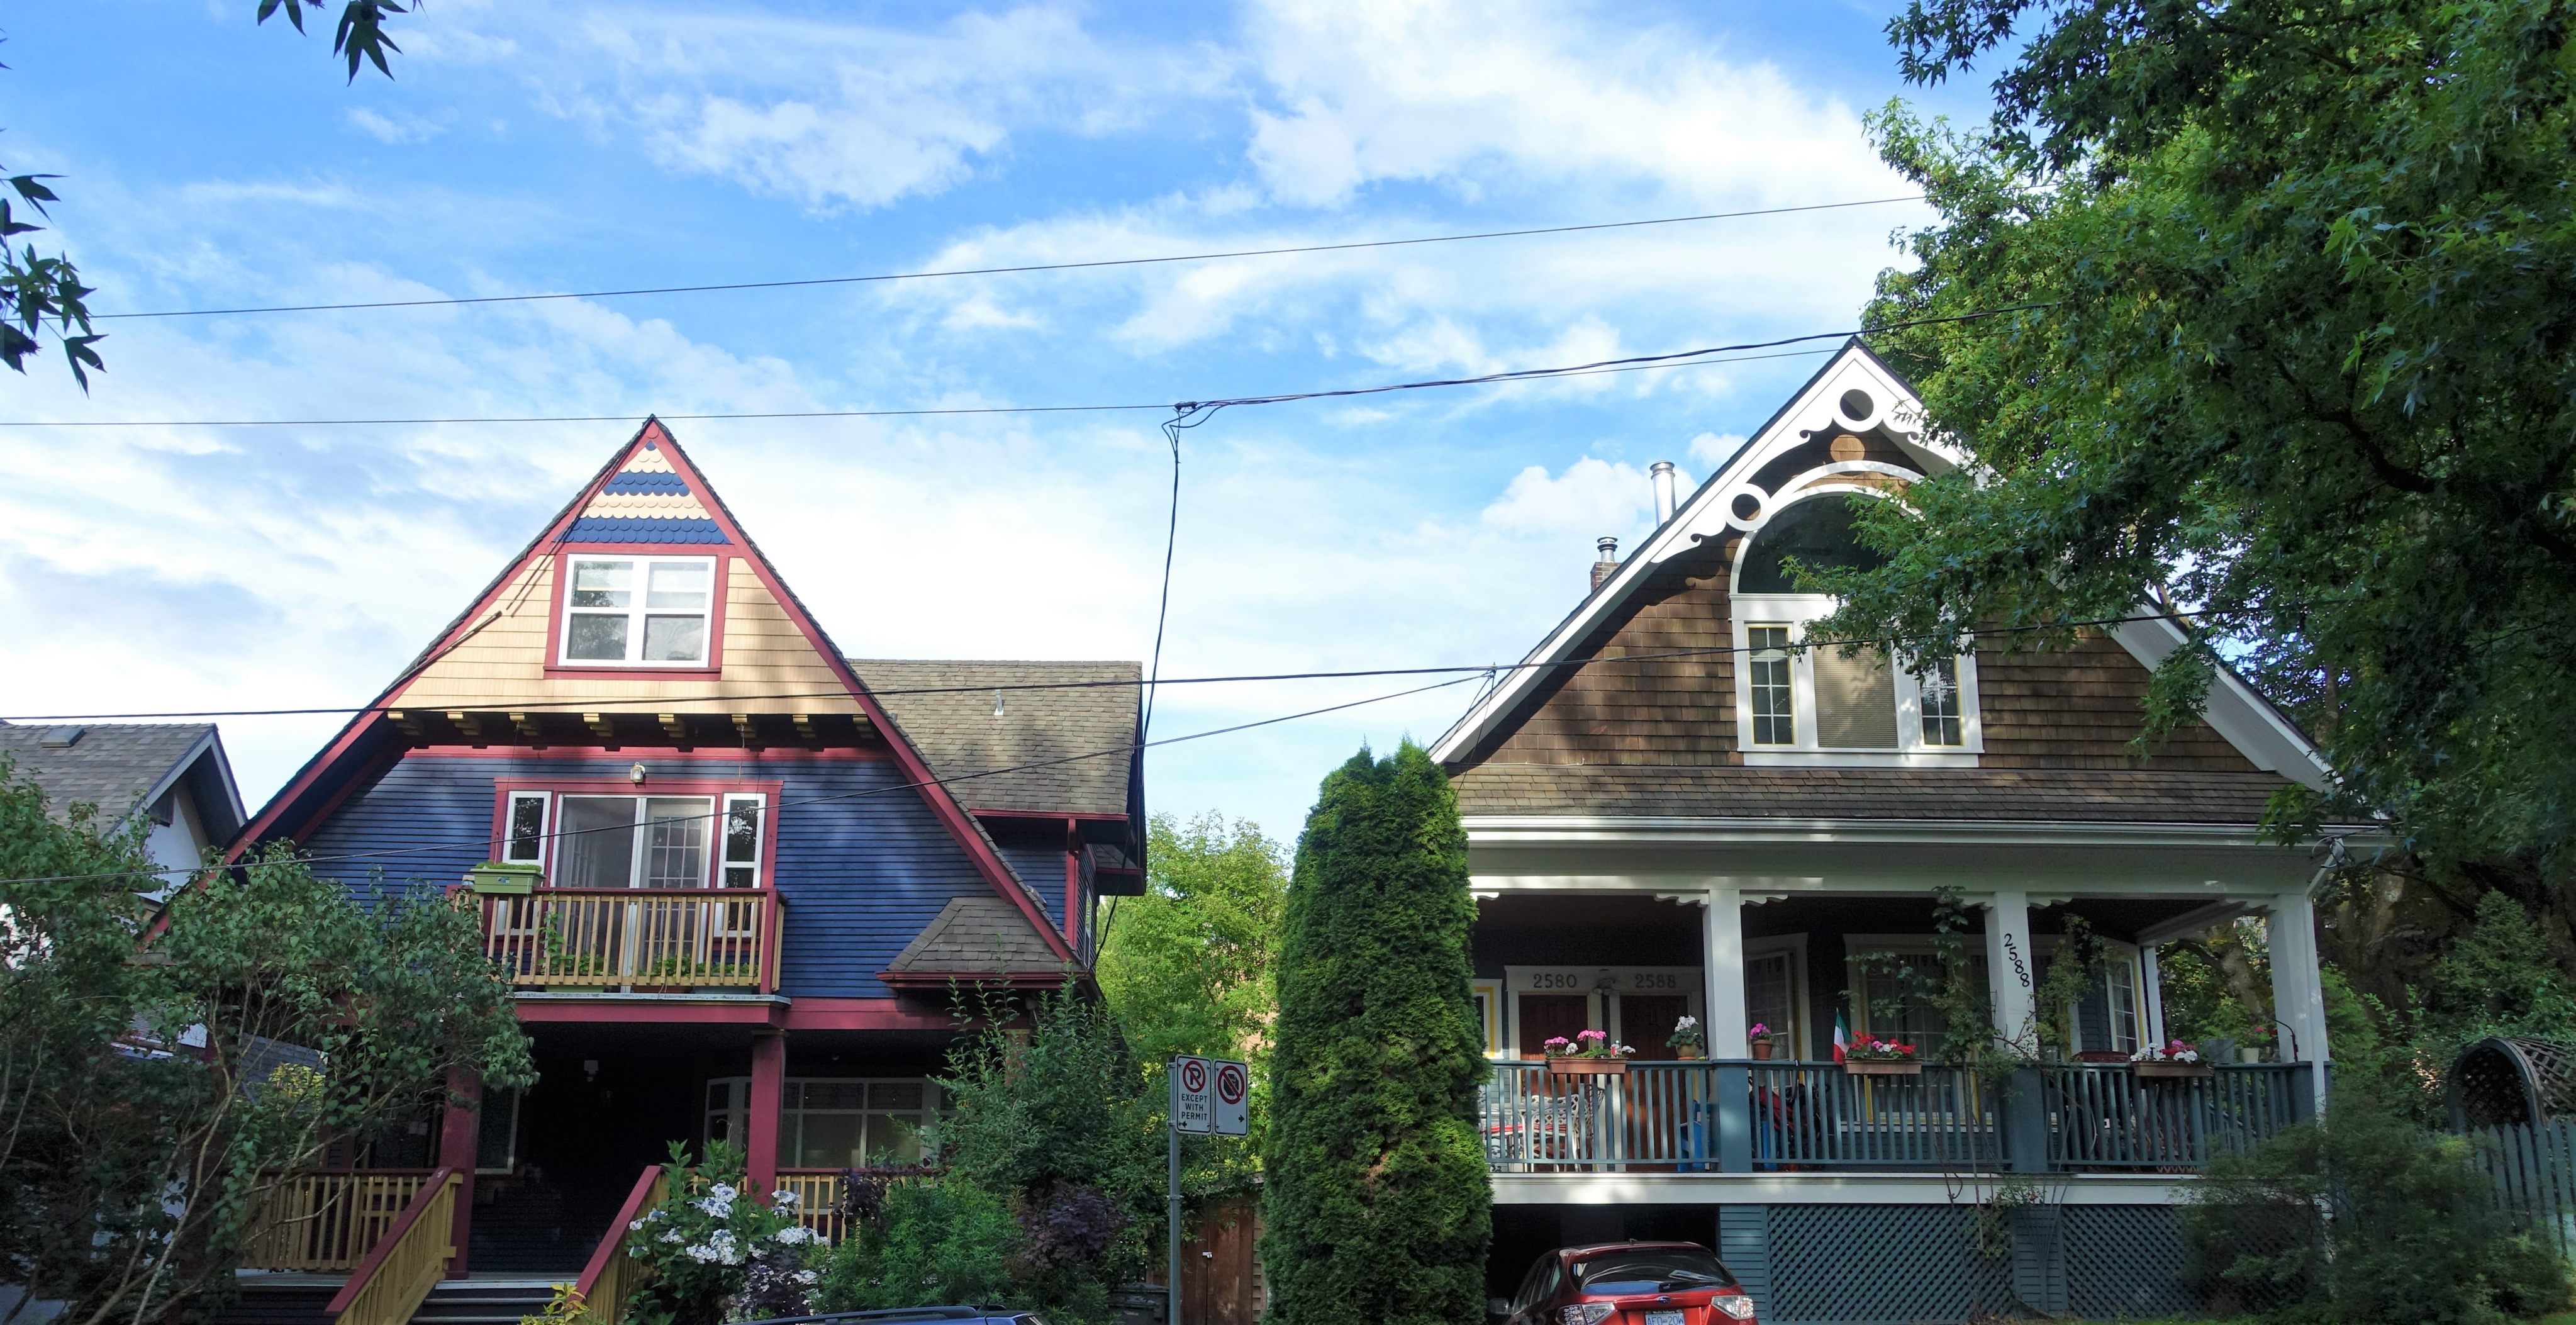 A street in the neighbourhood of Mount Pleasant, Vancouver. Photo: Ian Young